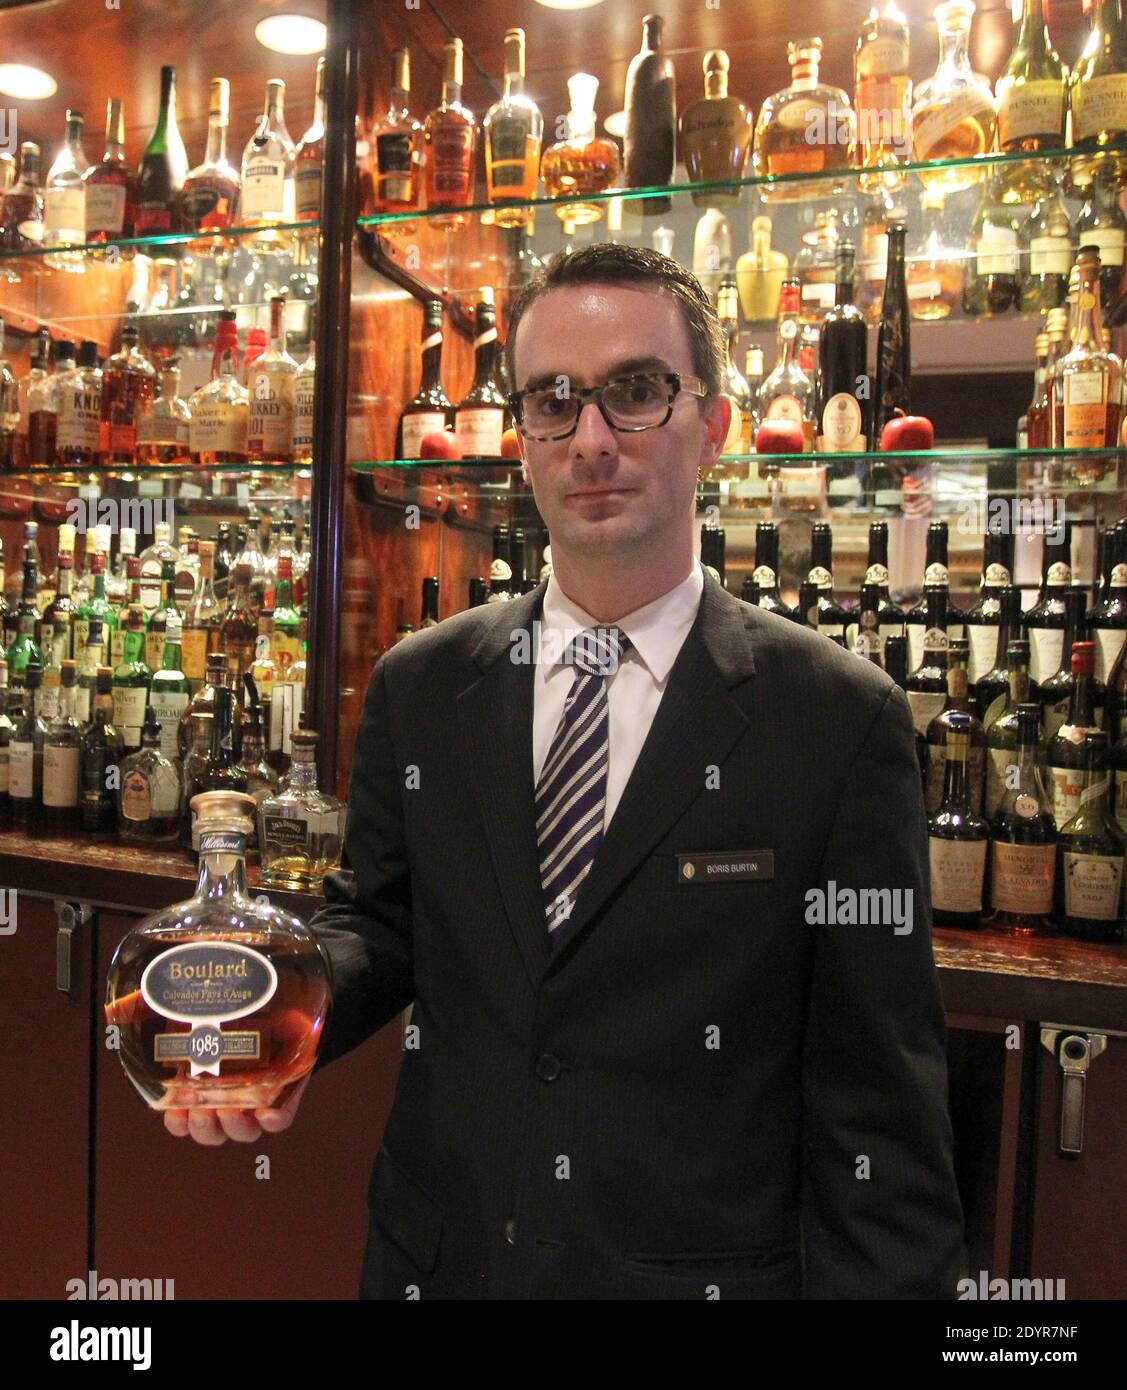 Boris Burtin, Restaurant and Bar manager with Jose Torrella Jr, Mixologist at the Barclay Bar at the Intercontinental in New York City, discusse the 30 types of the French apple brandy Calvados that the bar houses on July 5, 2013. Honored as the 'First Calvados Bar' in the US, the bar's menu offers a cocktail featuring calvados and apple juice from New York apples, 'flights' featuring four one-ounce tastings, and a 1939 vintage 'Apellation Calvados', priced at $198. A twice-distilled brandy from Normandy, Calvados blends over two dozen types of apples creating its distinct flavor and aroma. Ph Stock Photo